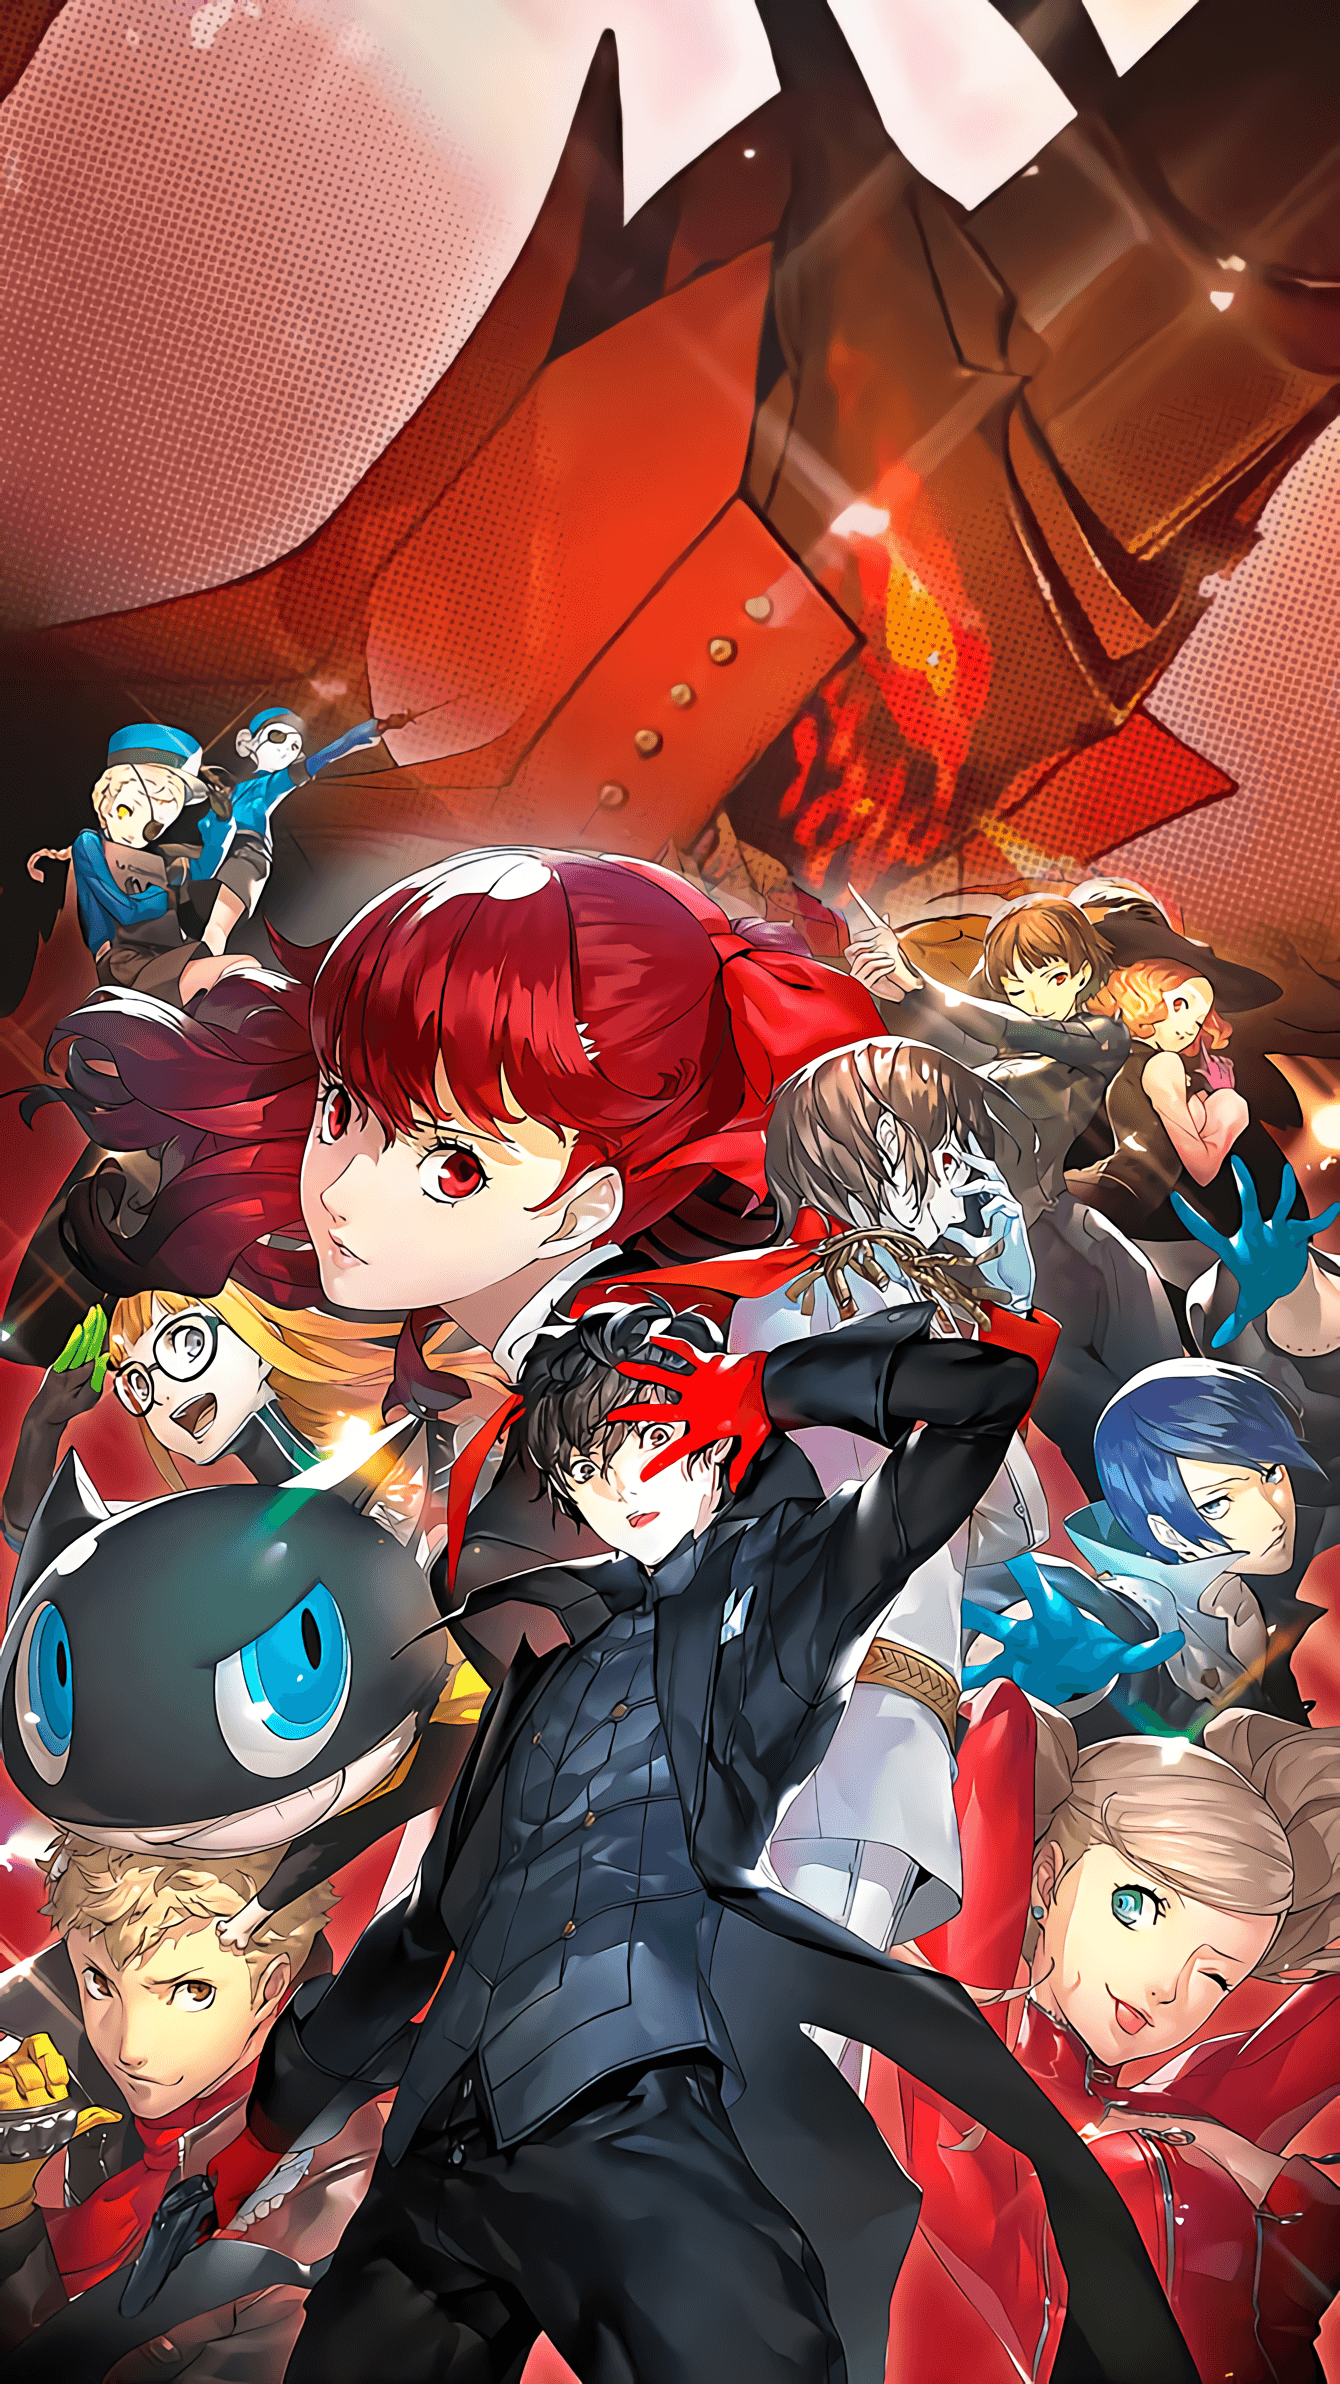 Here's a Persona 5 The Royal wallpaper! Upscaled to